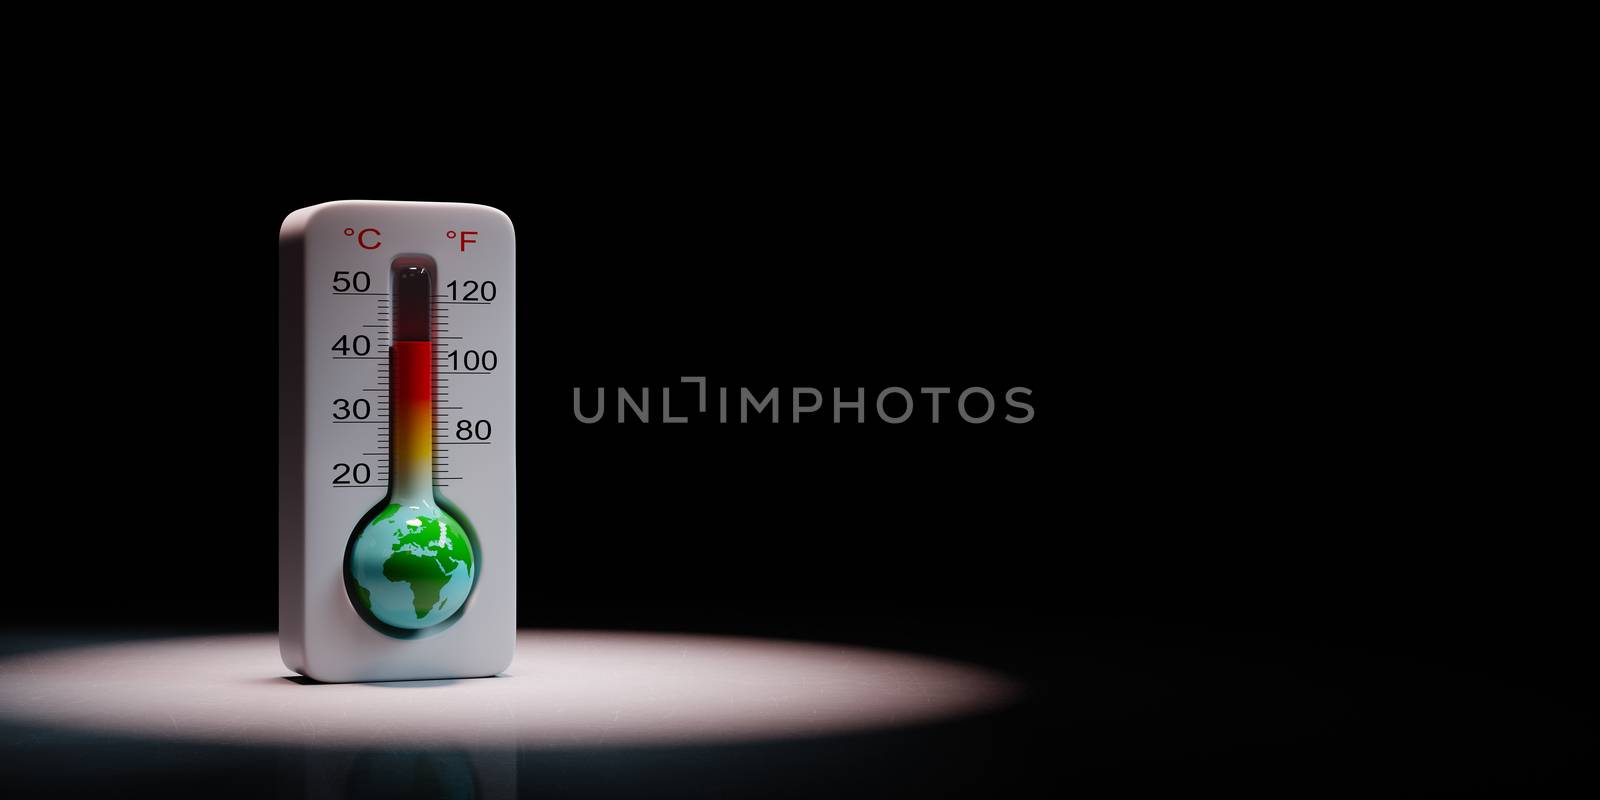 Earth in the Shape of a Thermometer Spotlighted on Black Background with Copy Space 3D Illustration, Global Warming Concept